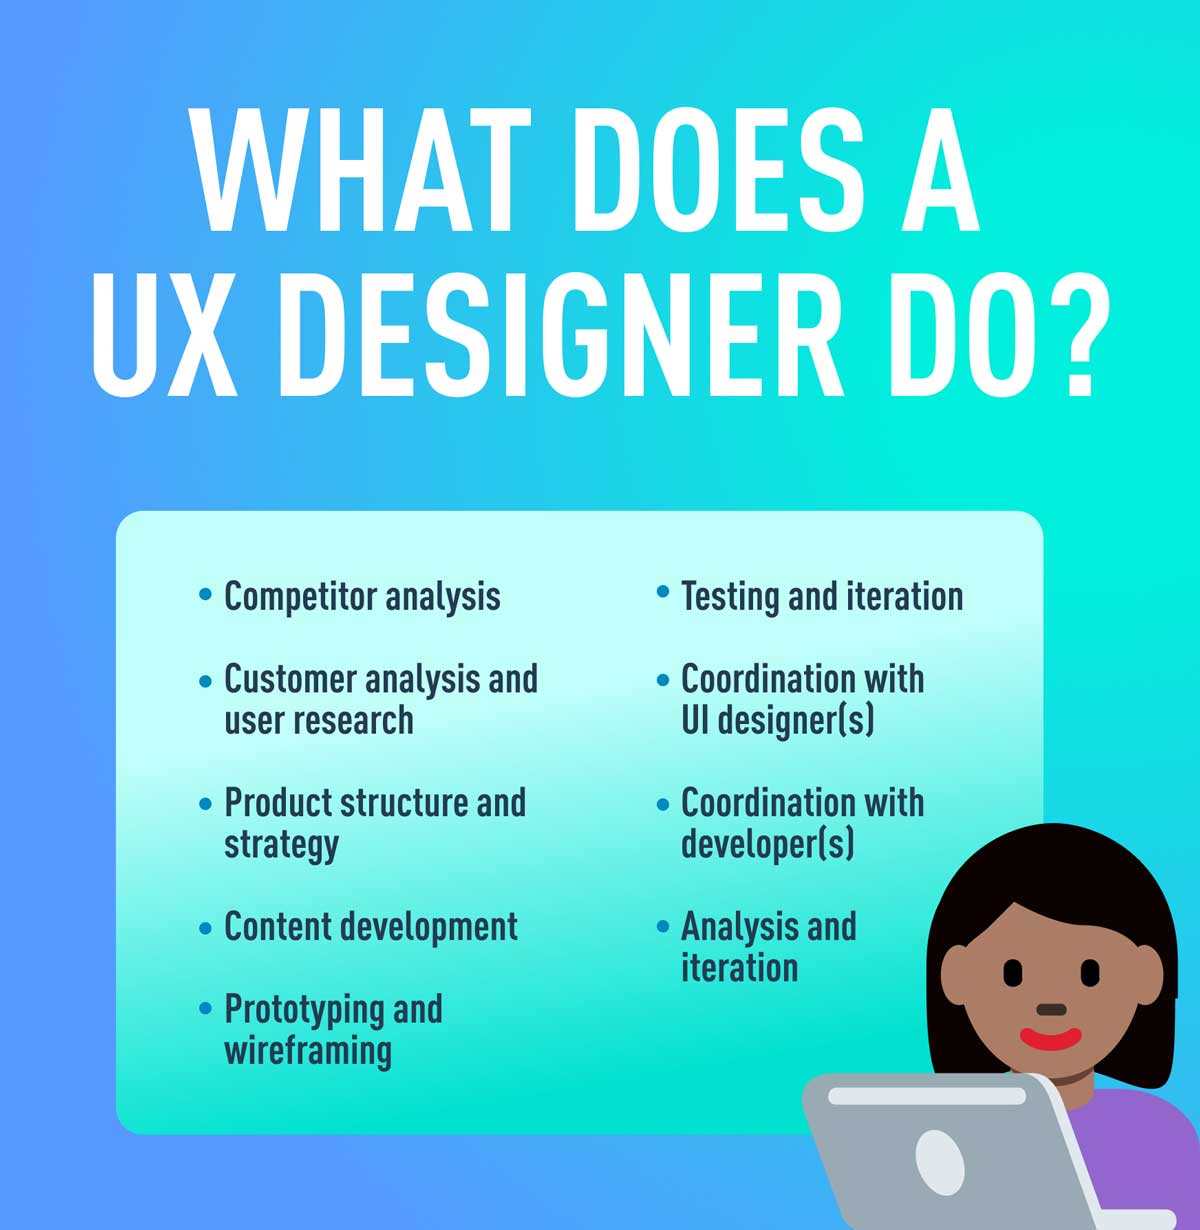 A list of the typical tasks carried out by UX designers